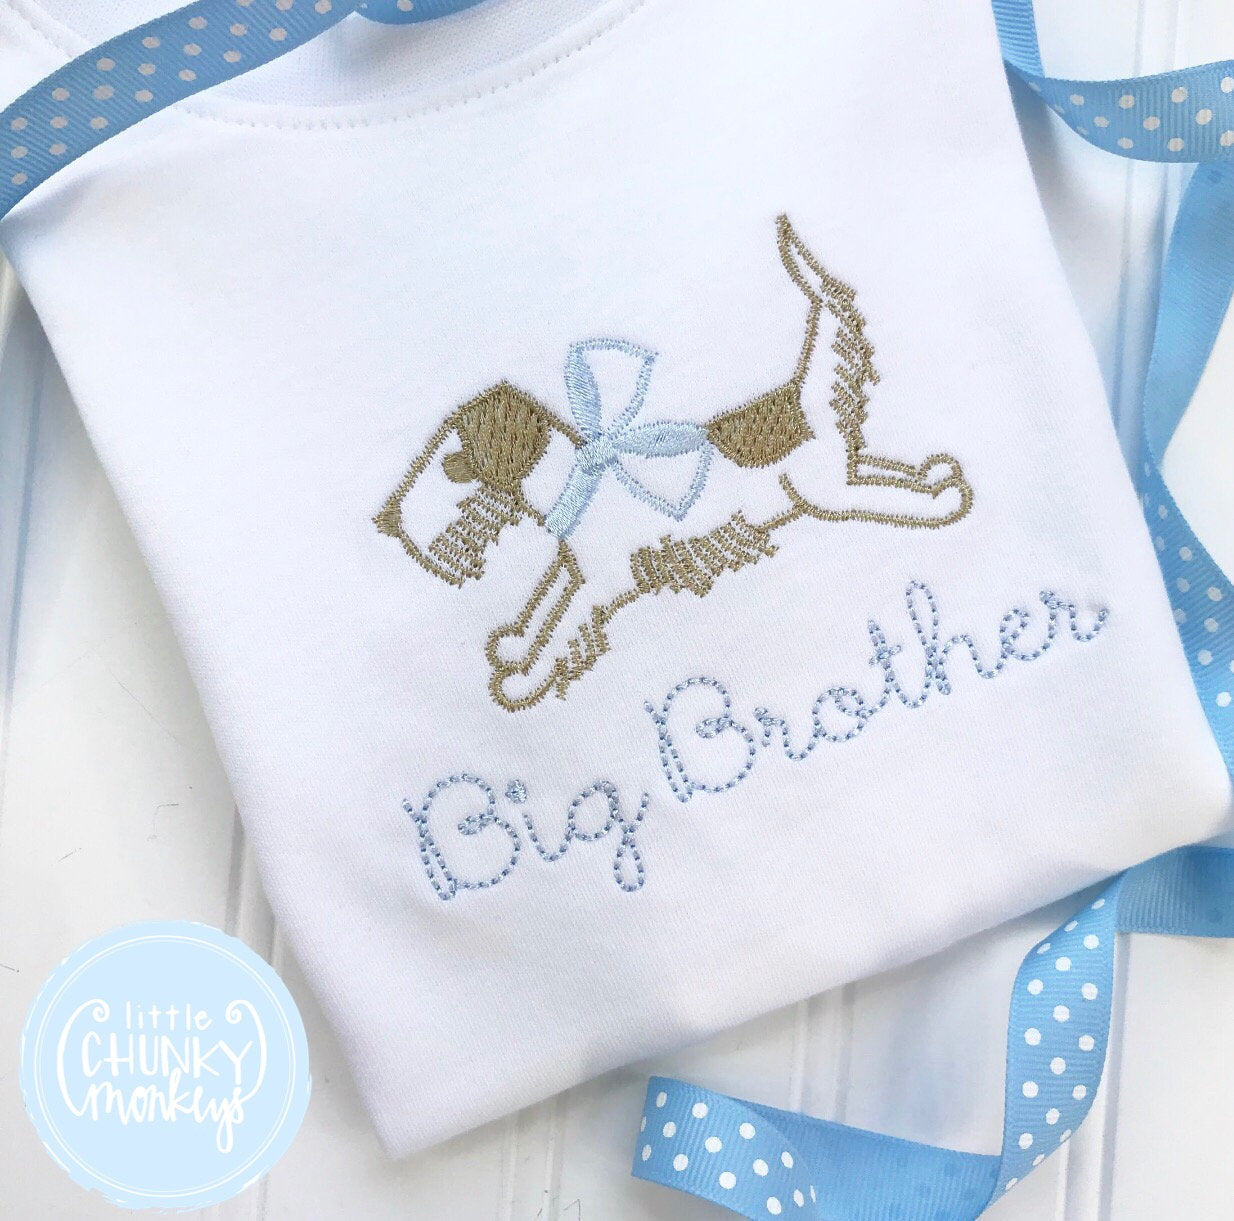 Boy Shirt - Personalized Big Brother Shirt with Dog